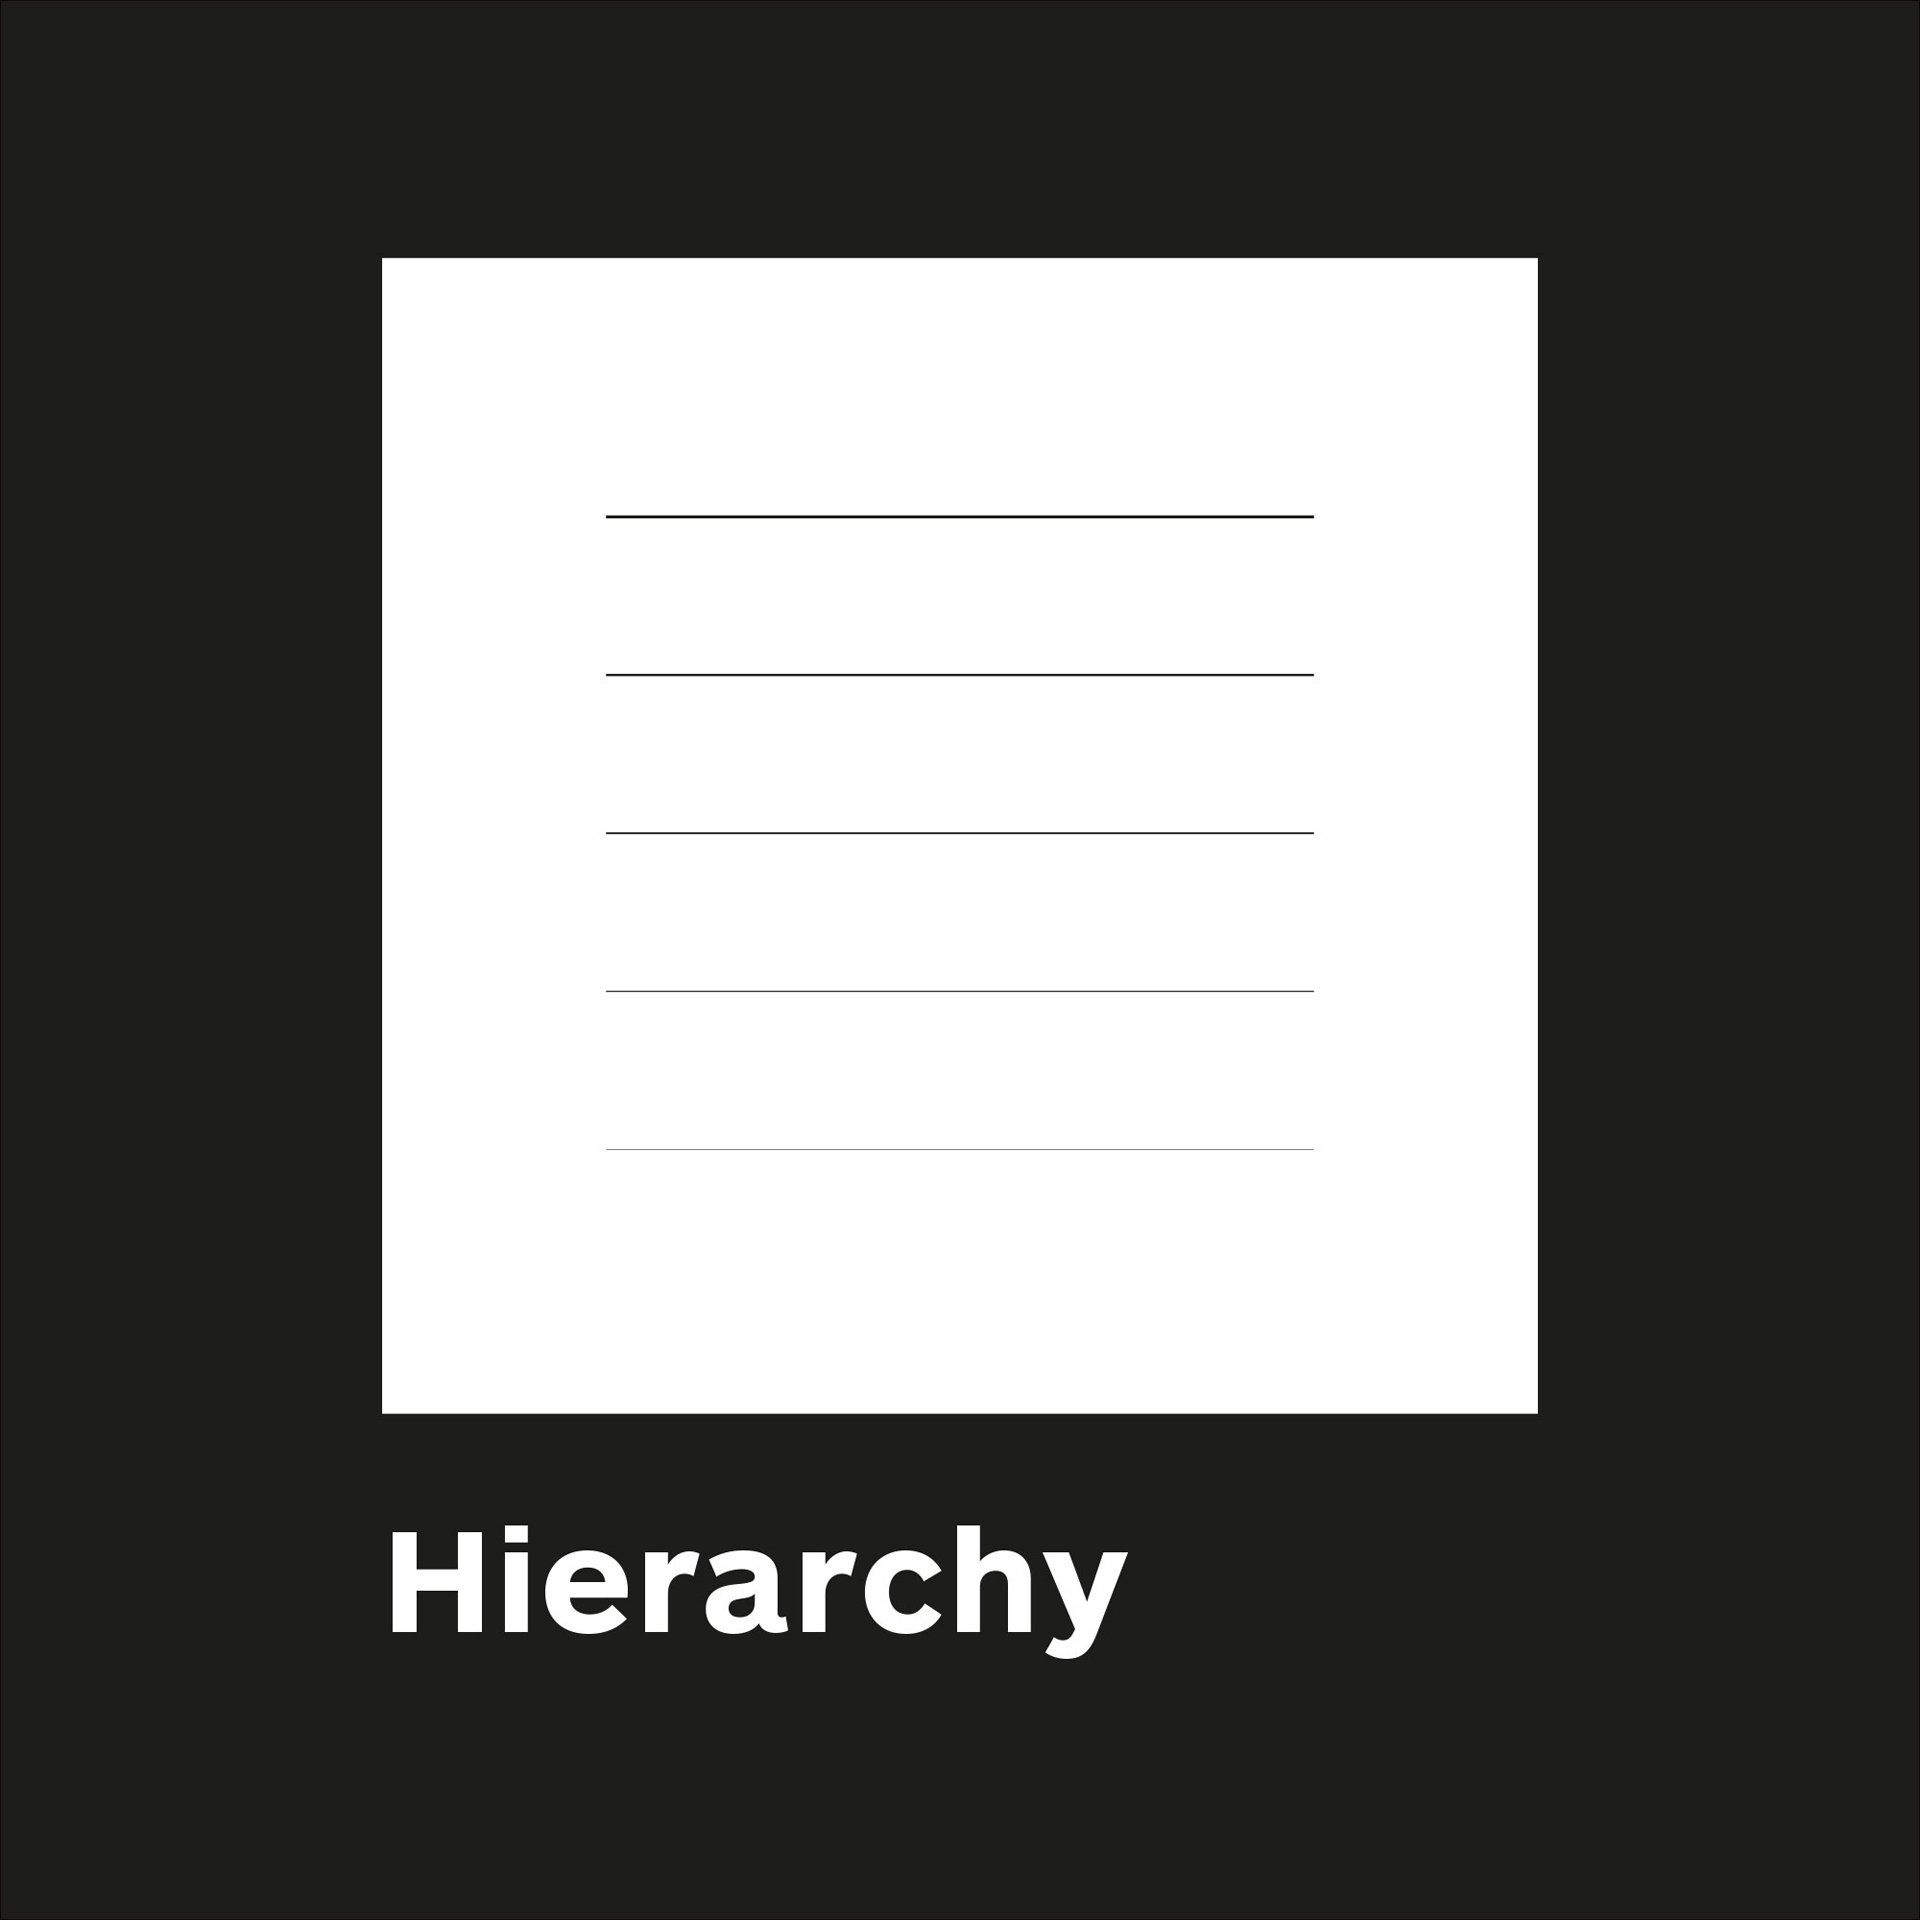 Illustration of the hiearchy principle in graphic design